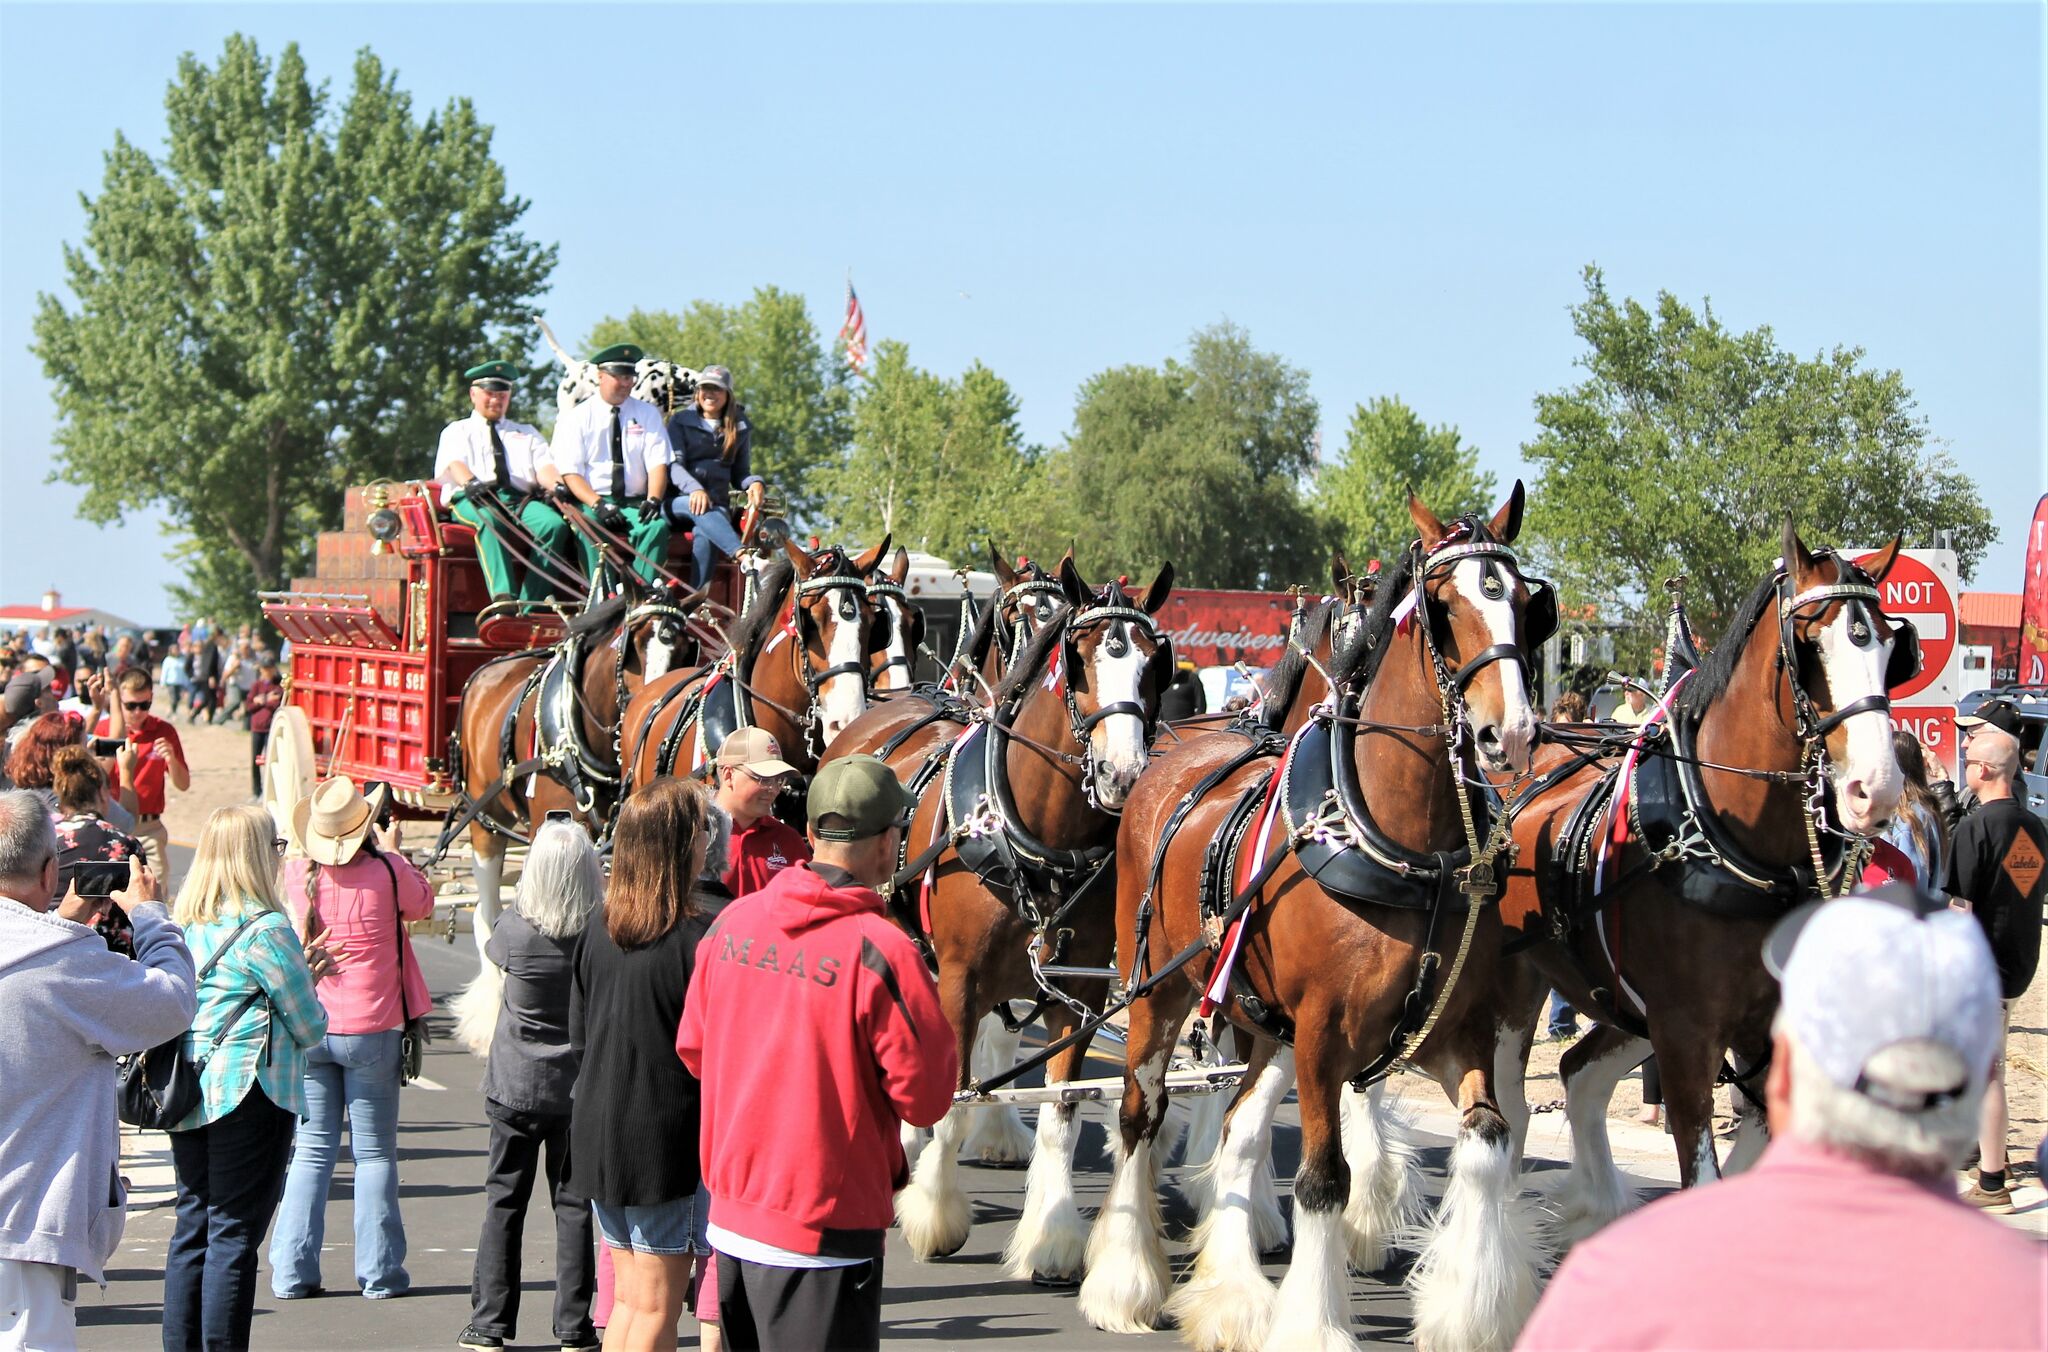 The Anheuser-Busch Clydesdale eight horse hitch makes its way